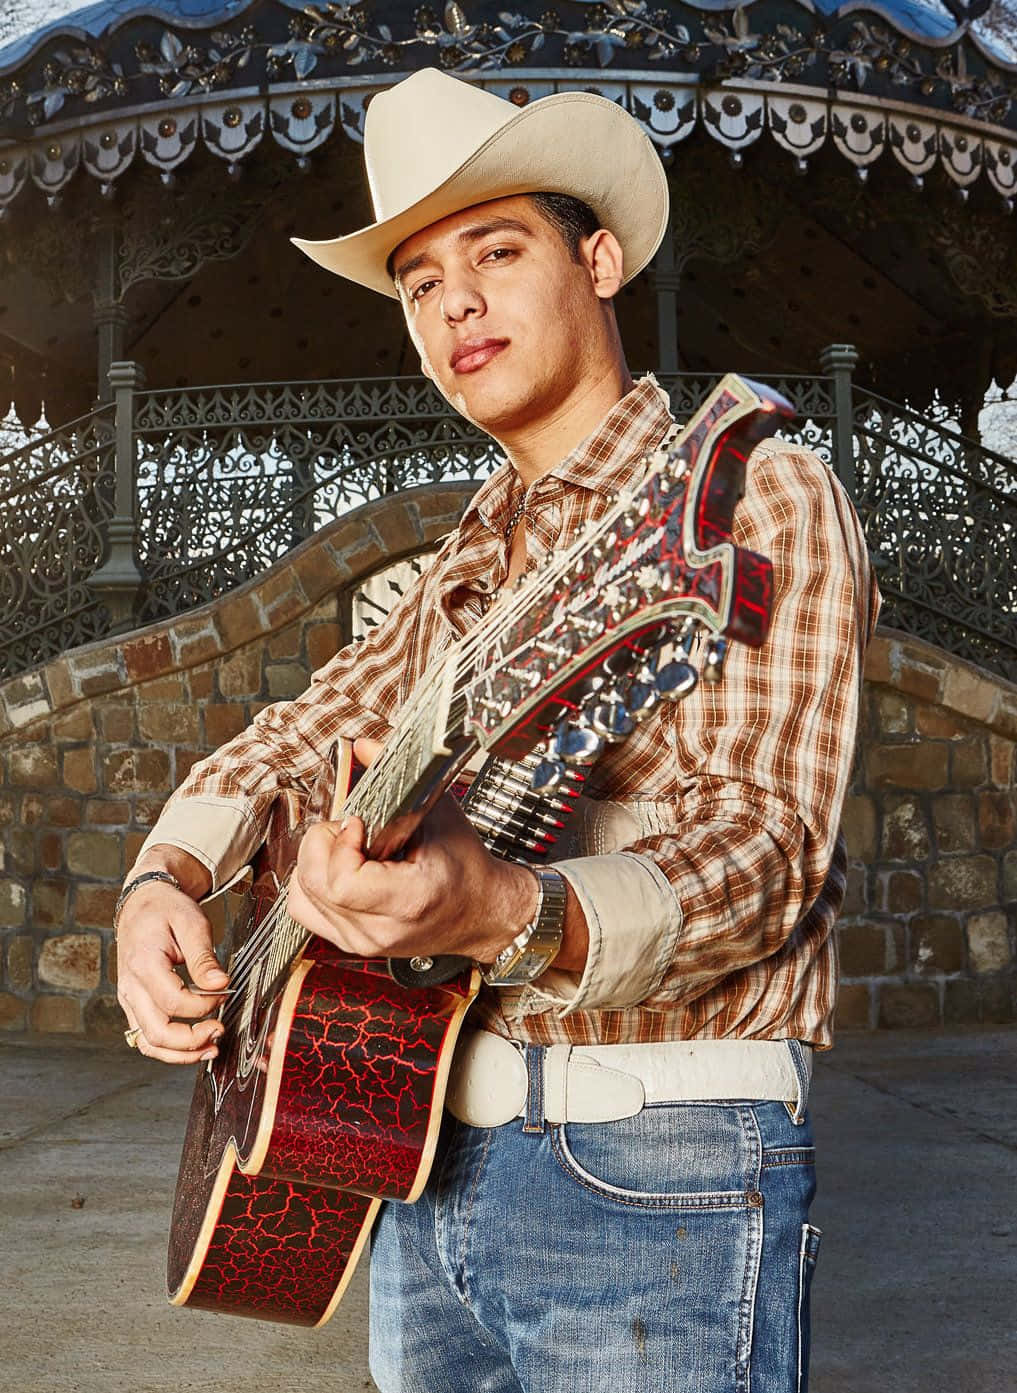 Ariel Camacho performing live on stage Wallpaper